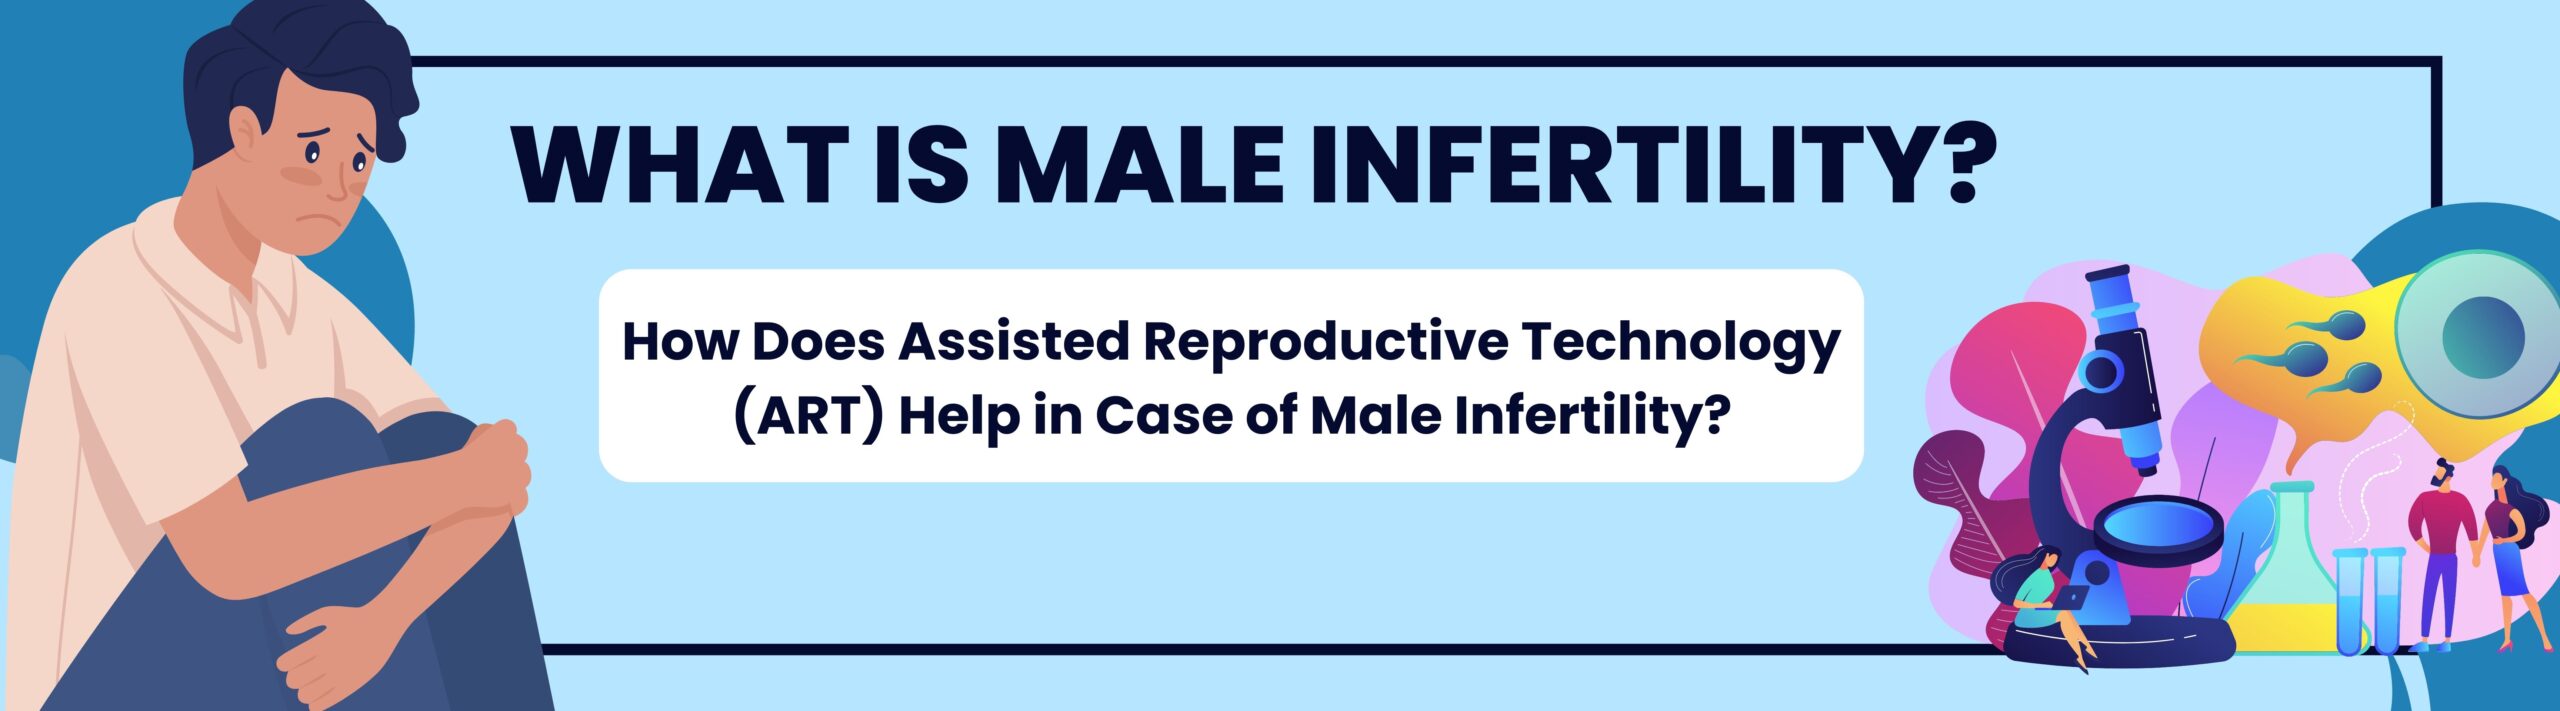 What is Male Infertility and how does assisted reproductive technology (ART) help in case of Male Infertility?